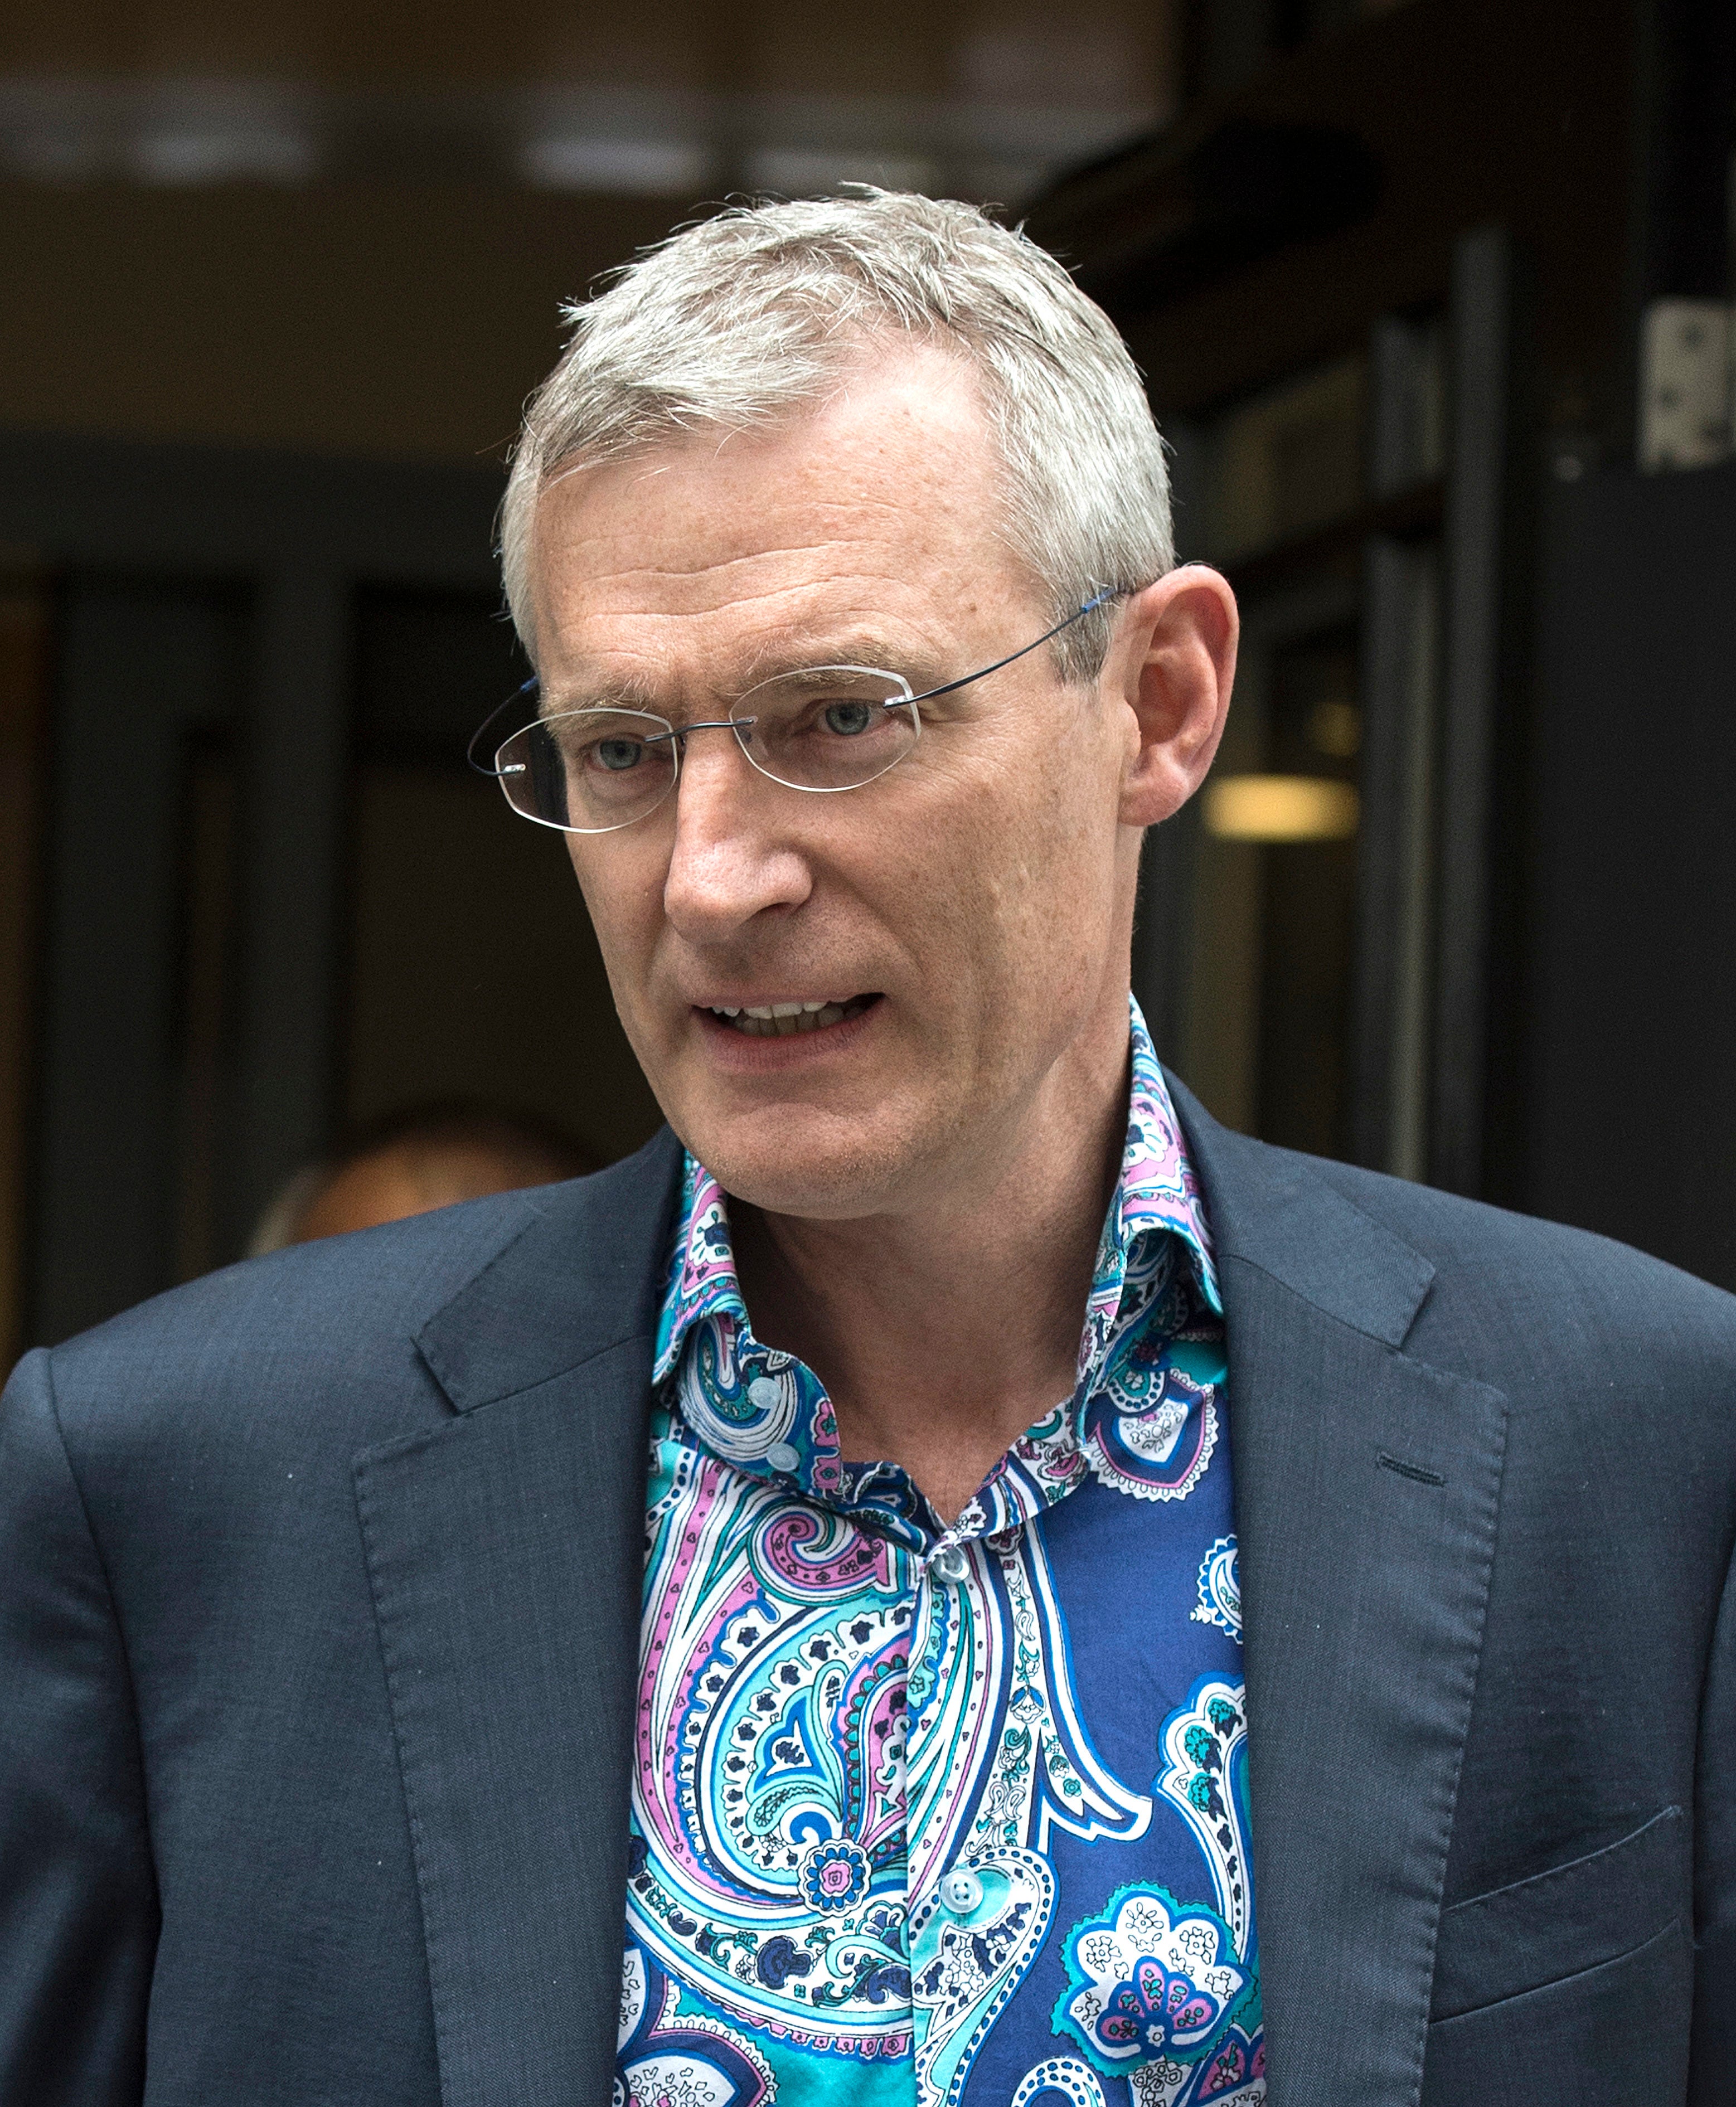 Jeremy Vine has spoken to BBC’s Newsnight about his stalking ordeal (Lauren Hurley/PA)